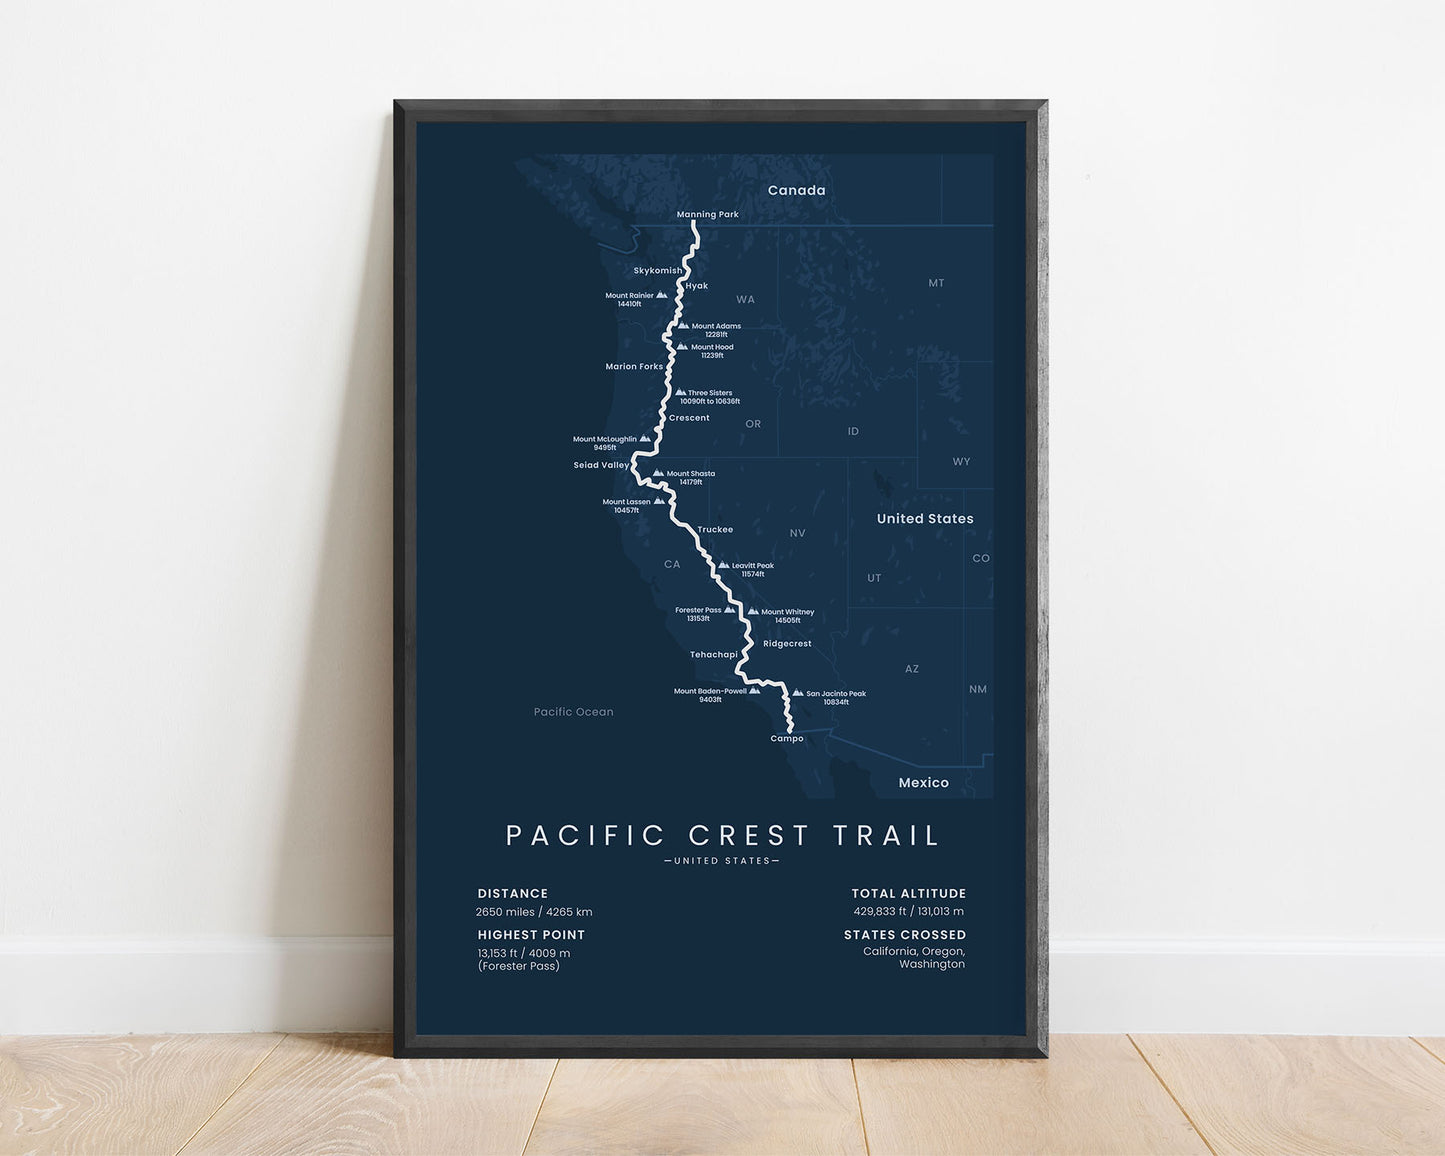 Pacific Crest Trail (crossing Sierra Nevada and Cascade mountain ranges) thru hiking wall art with blue background